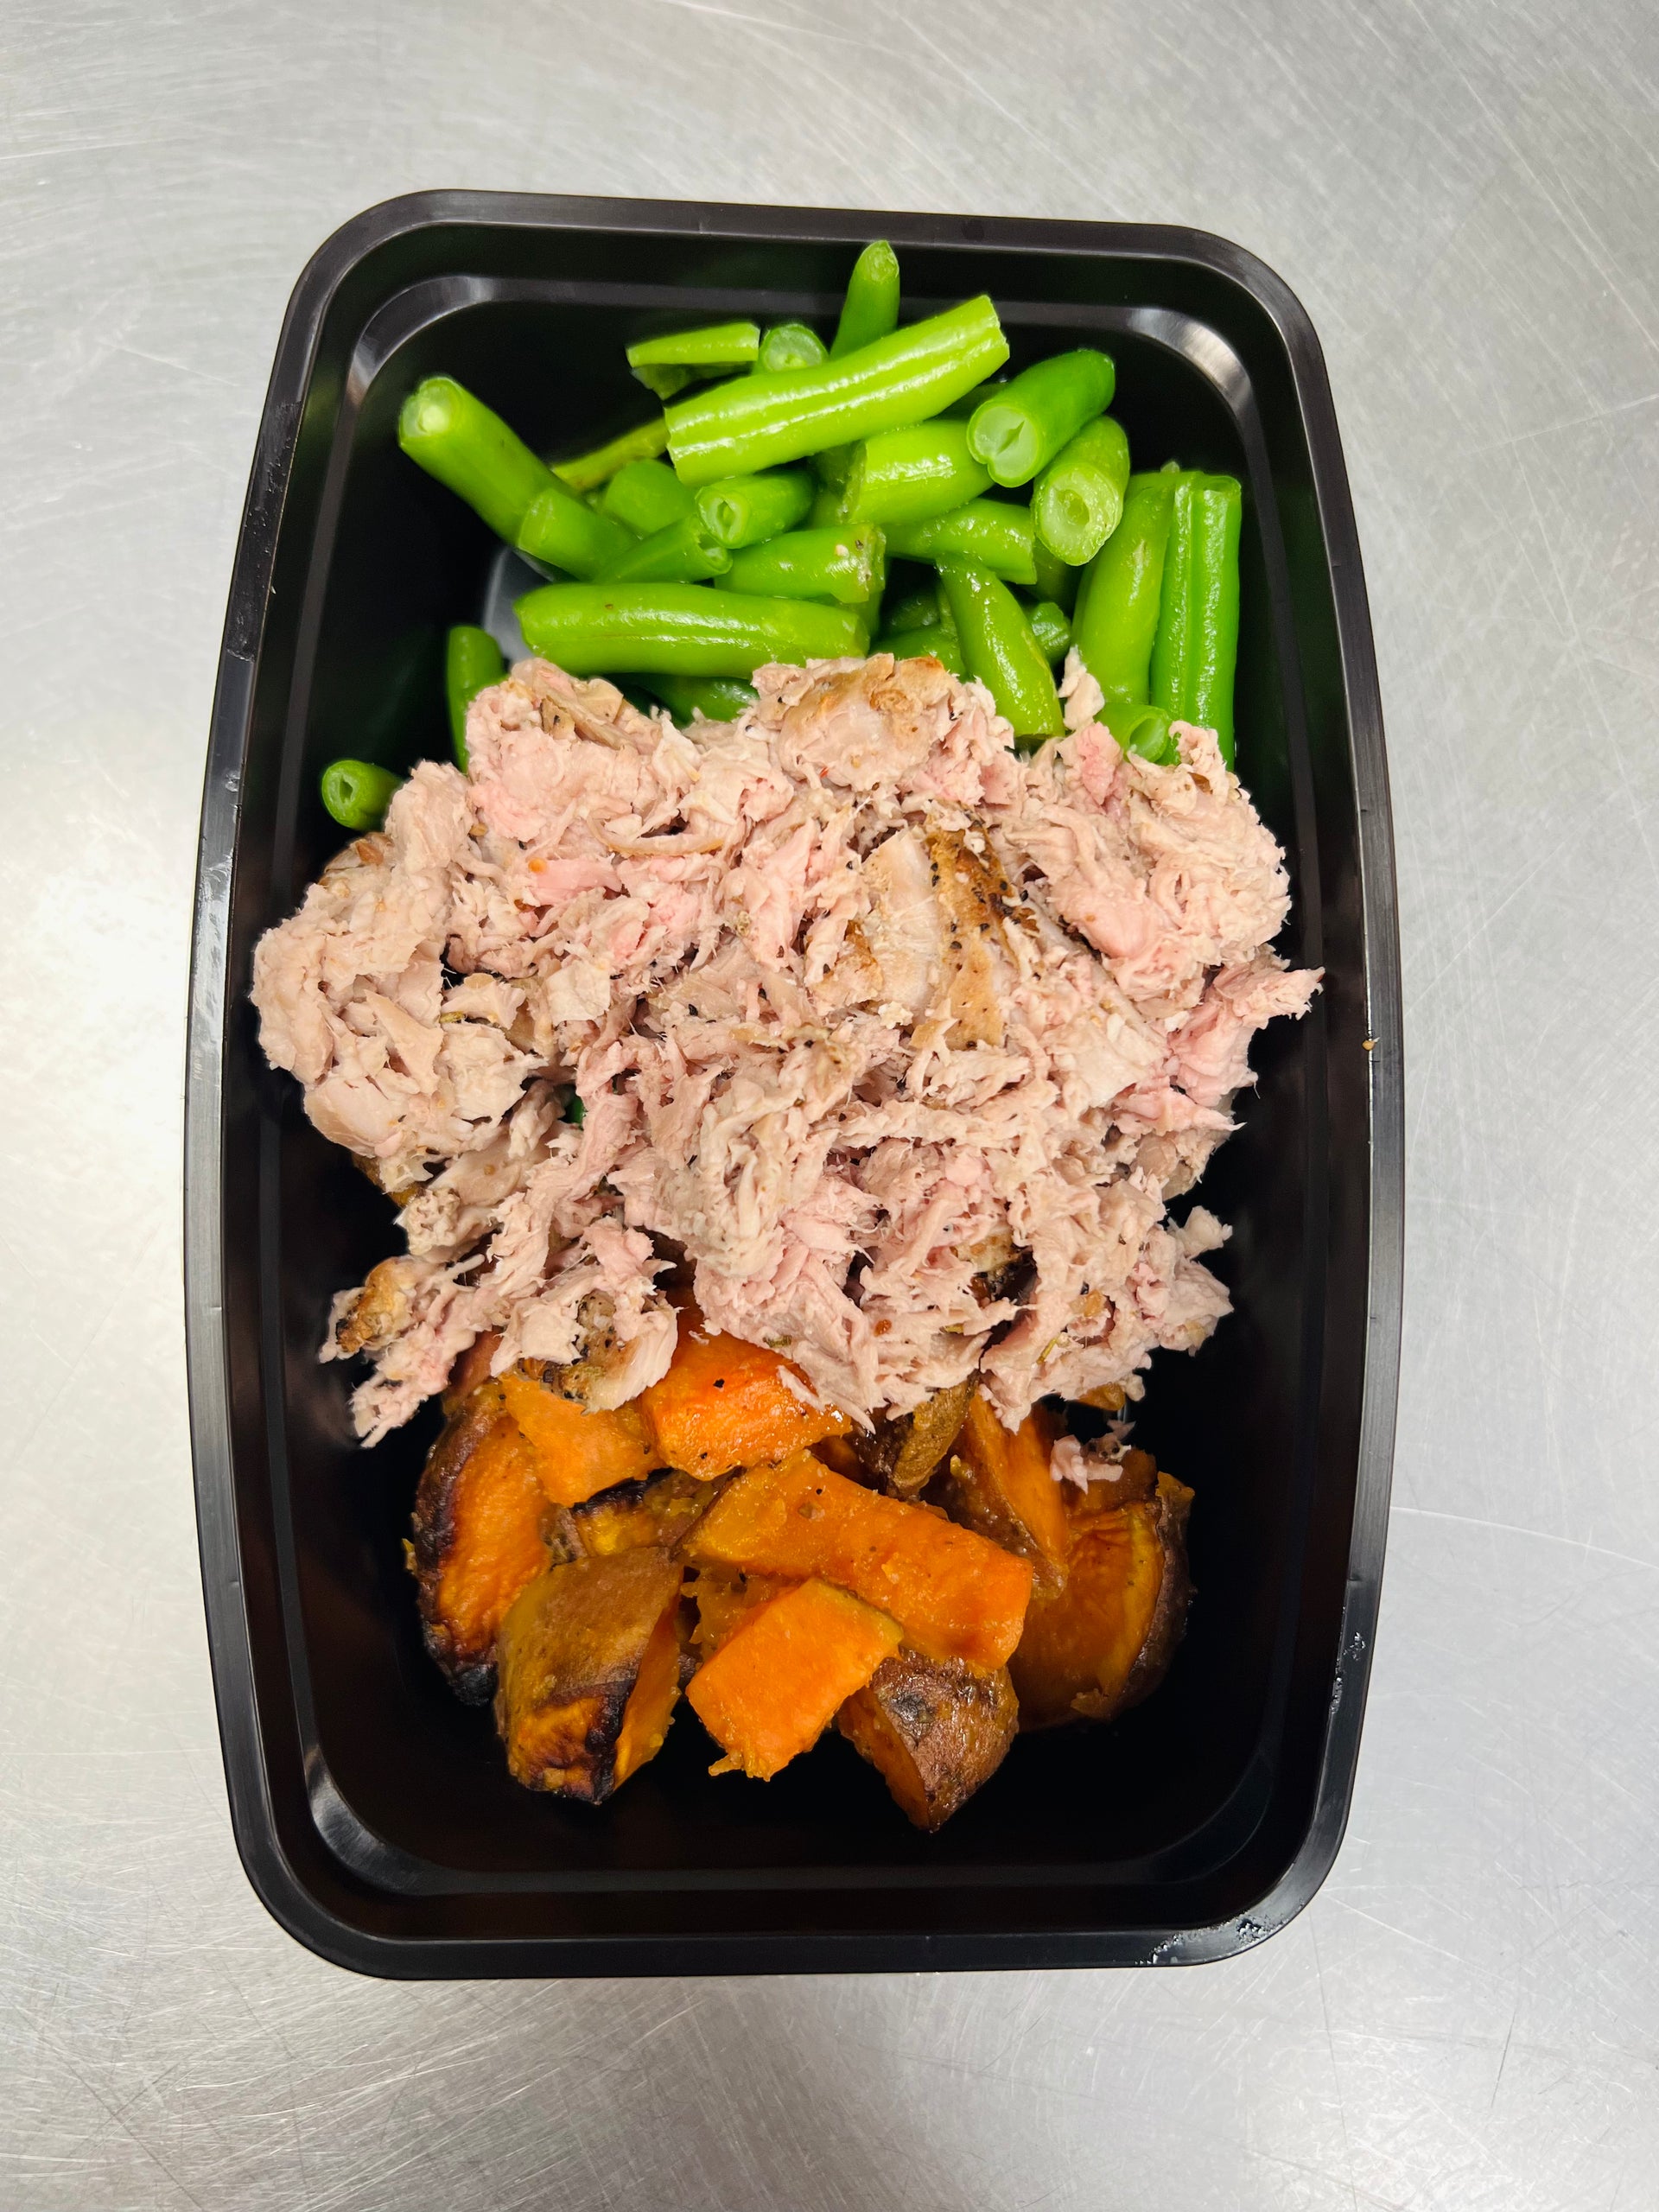 Create Your Own Meal: Pulled Pork